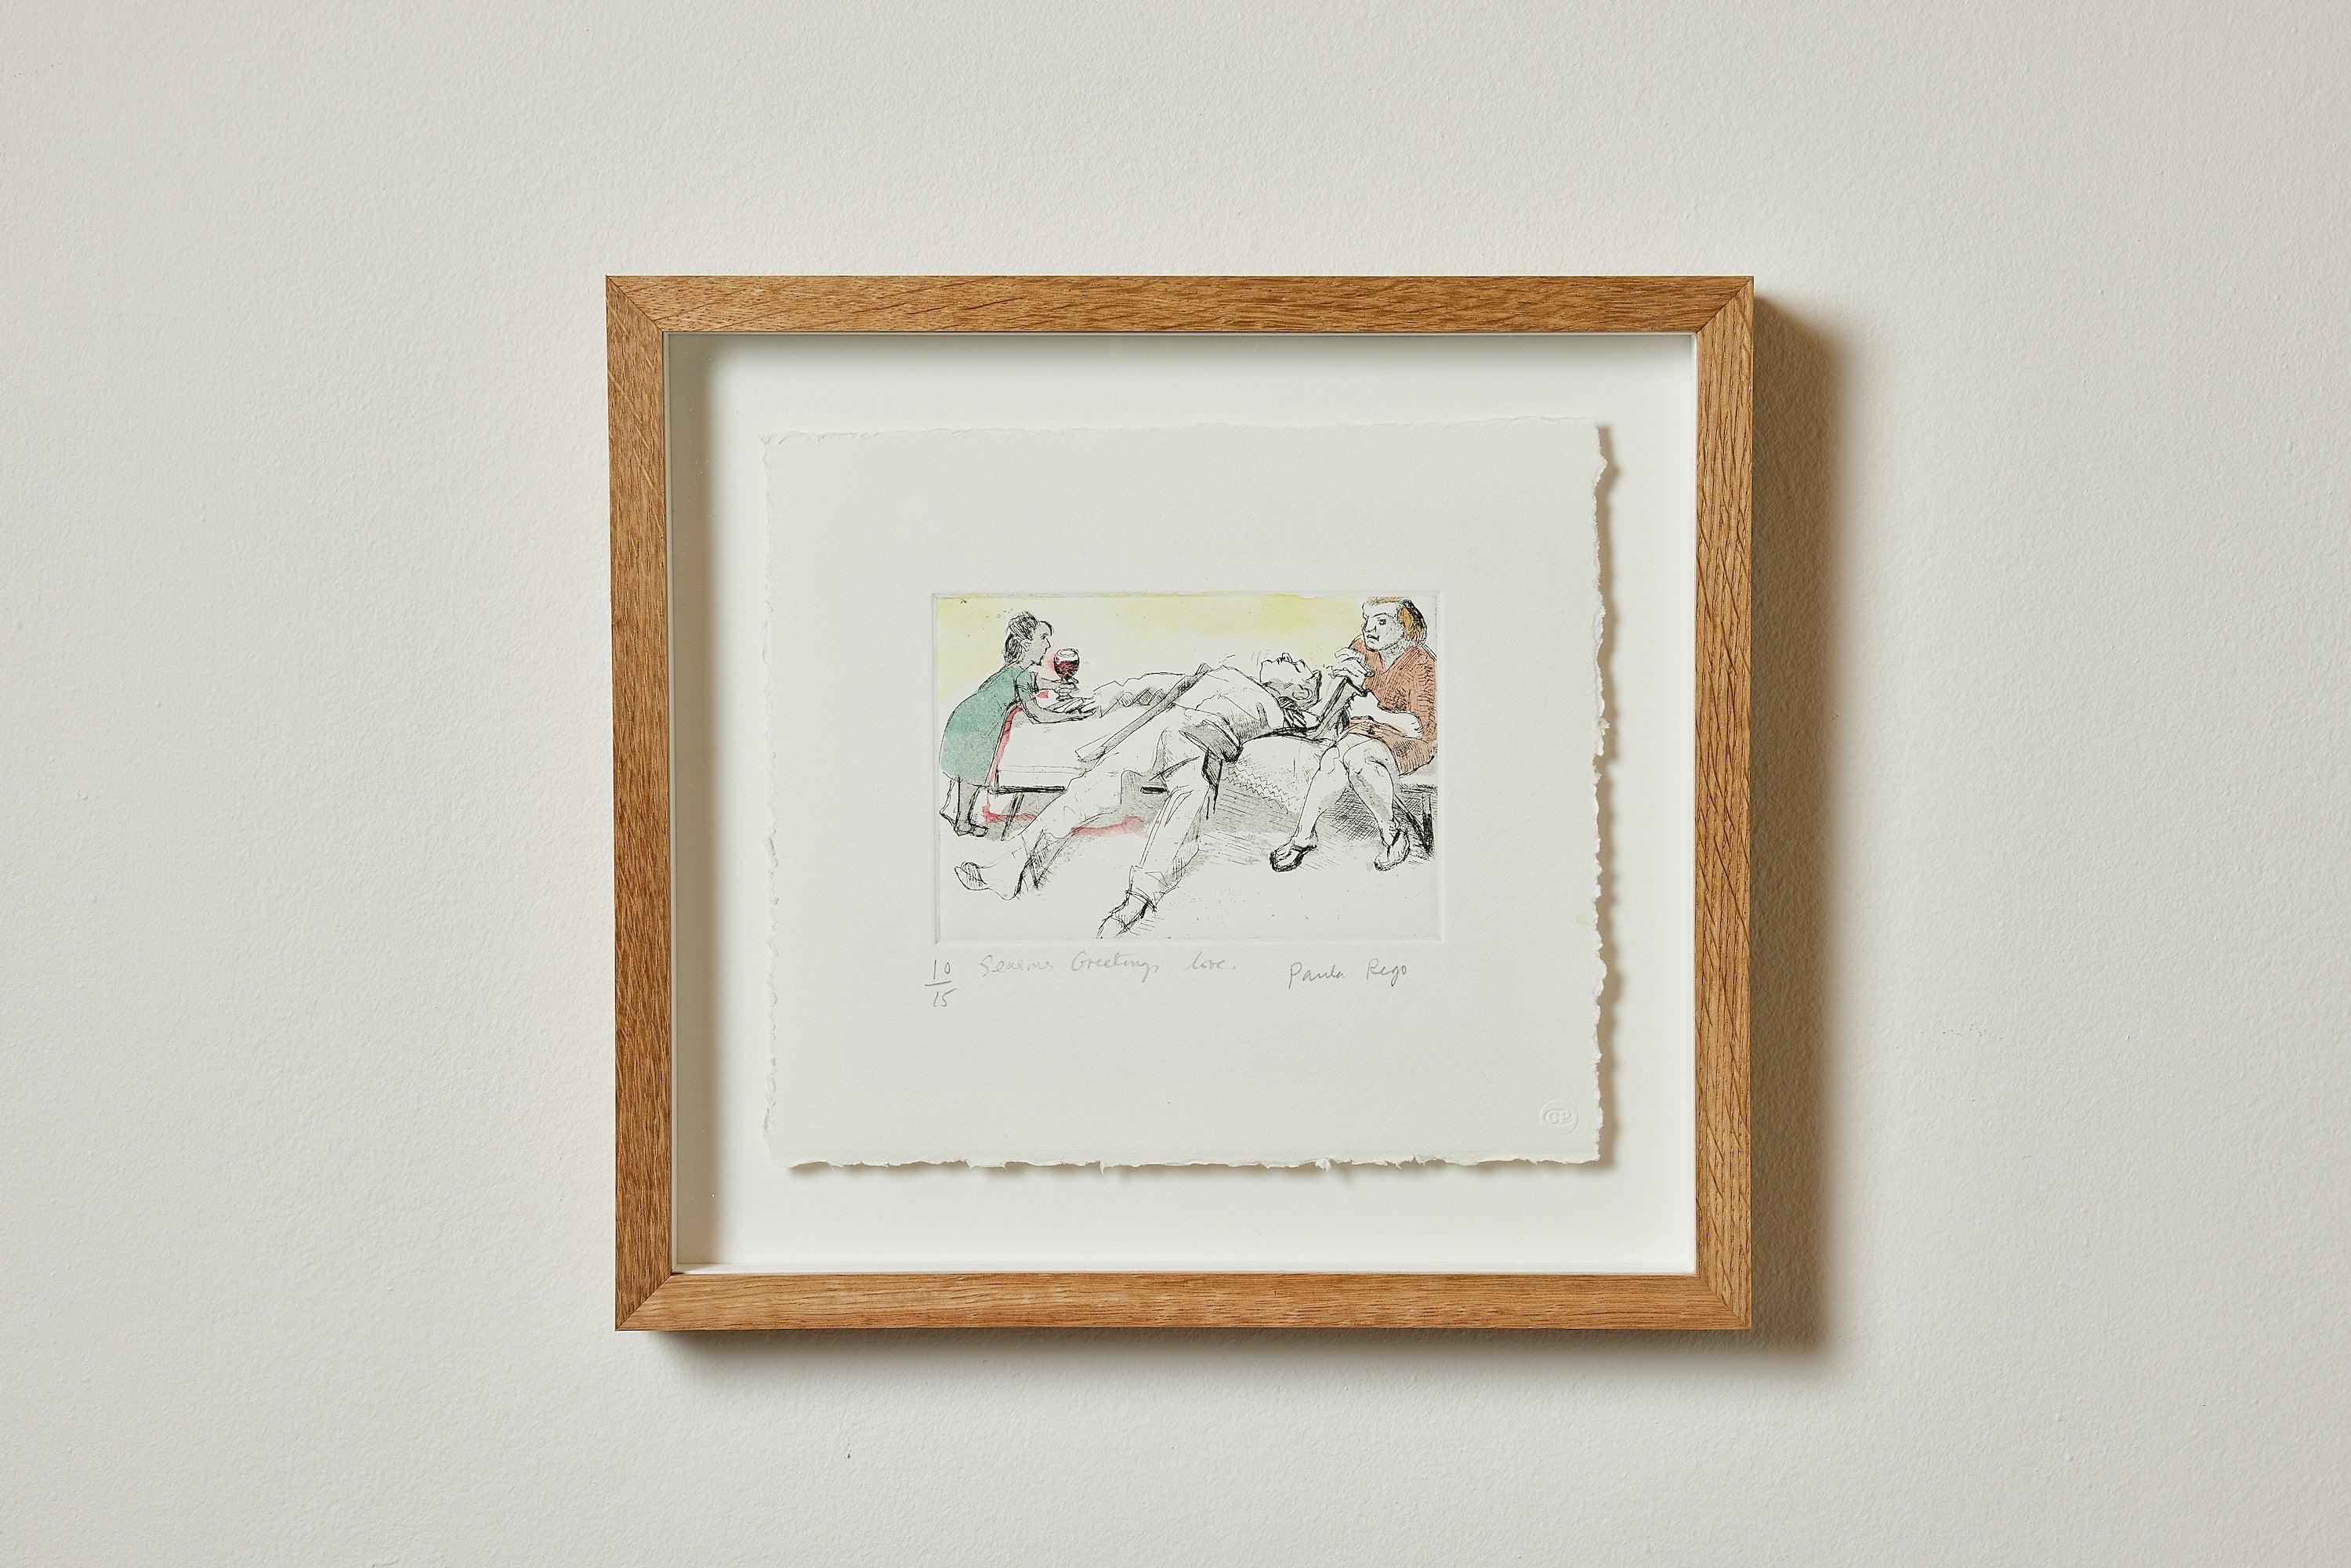 Untitled (Christmas gift), 2007
Paula Rego

Etching with hand-colouring, on wove
Signed, inscribed ‘Season’s Greetings love’ and numbered from the edition of 15
Plate: 9.8 × 14 cm (3.9 × 5.5 in)
Sheet: 20.8 × 23.2 cm (8.2 × 9.1 in)
Literature: